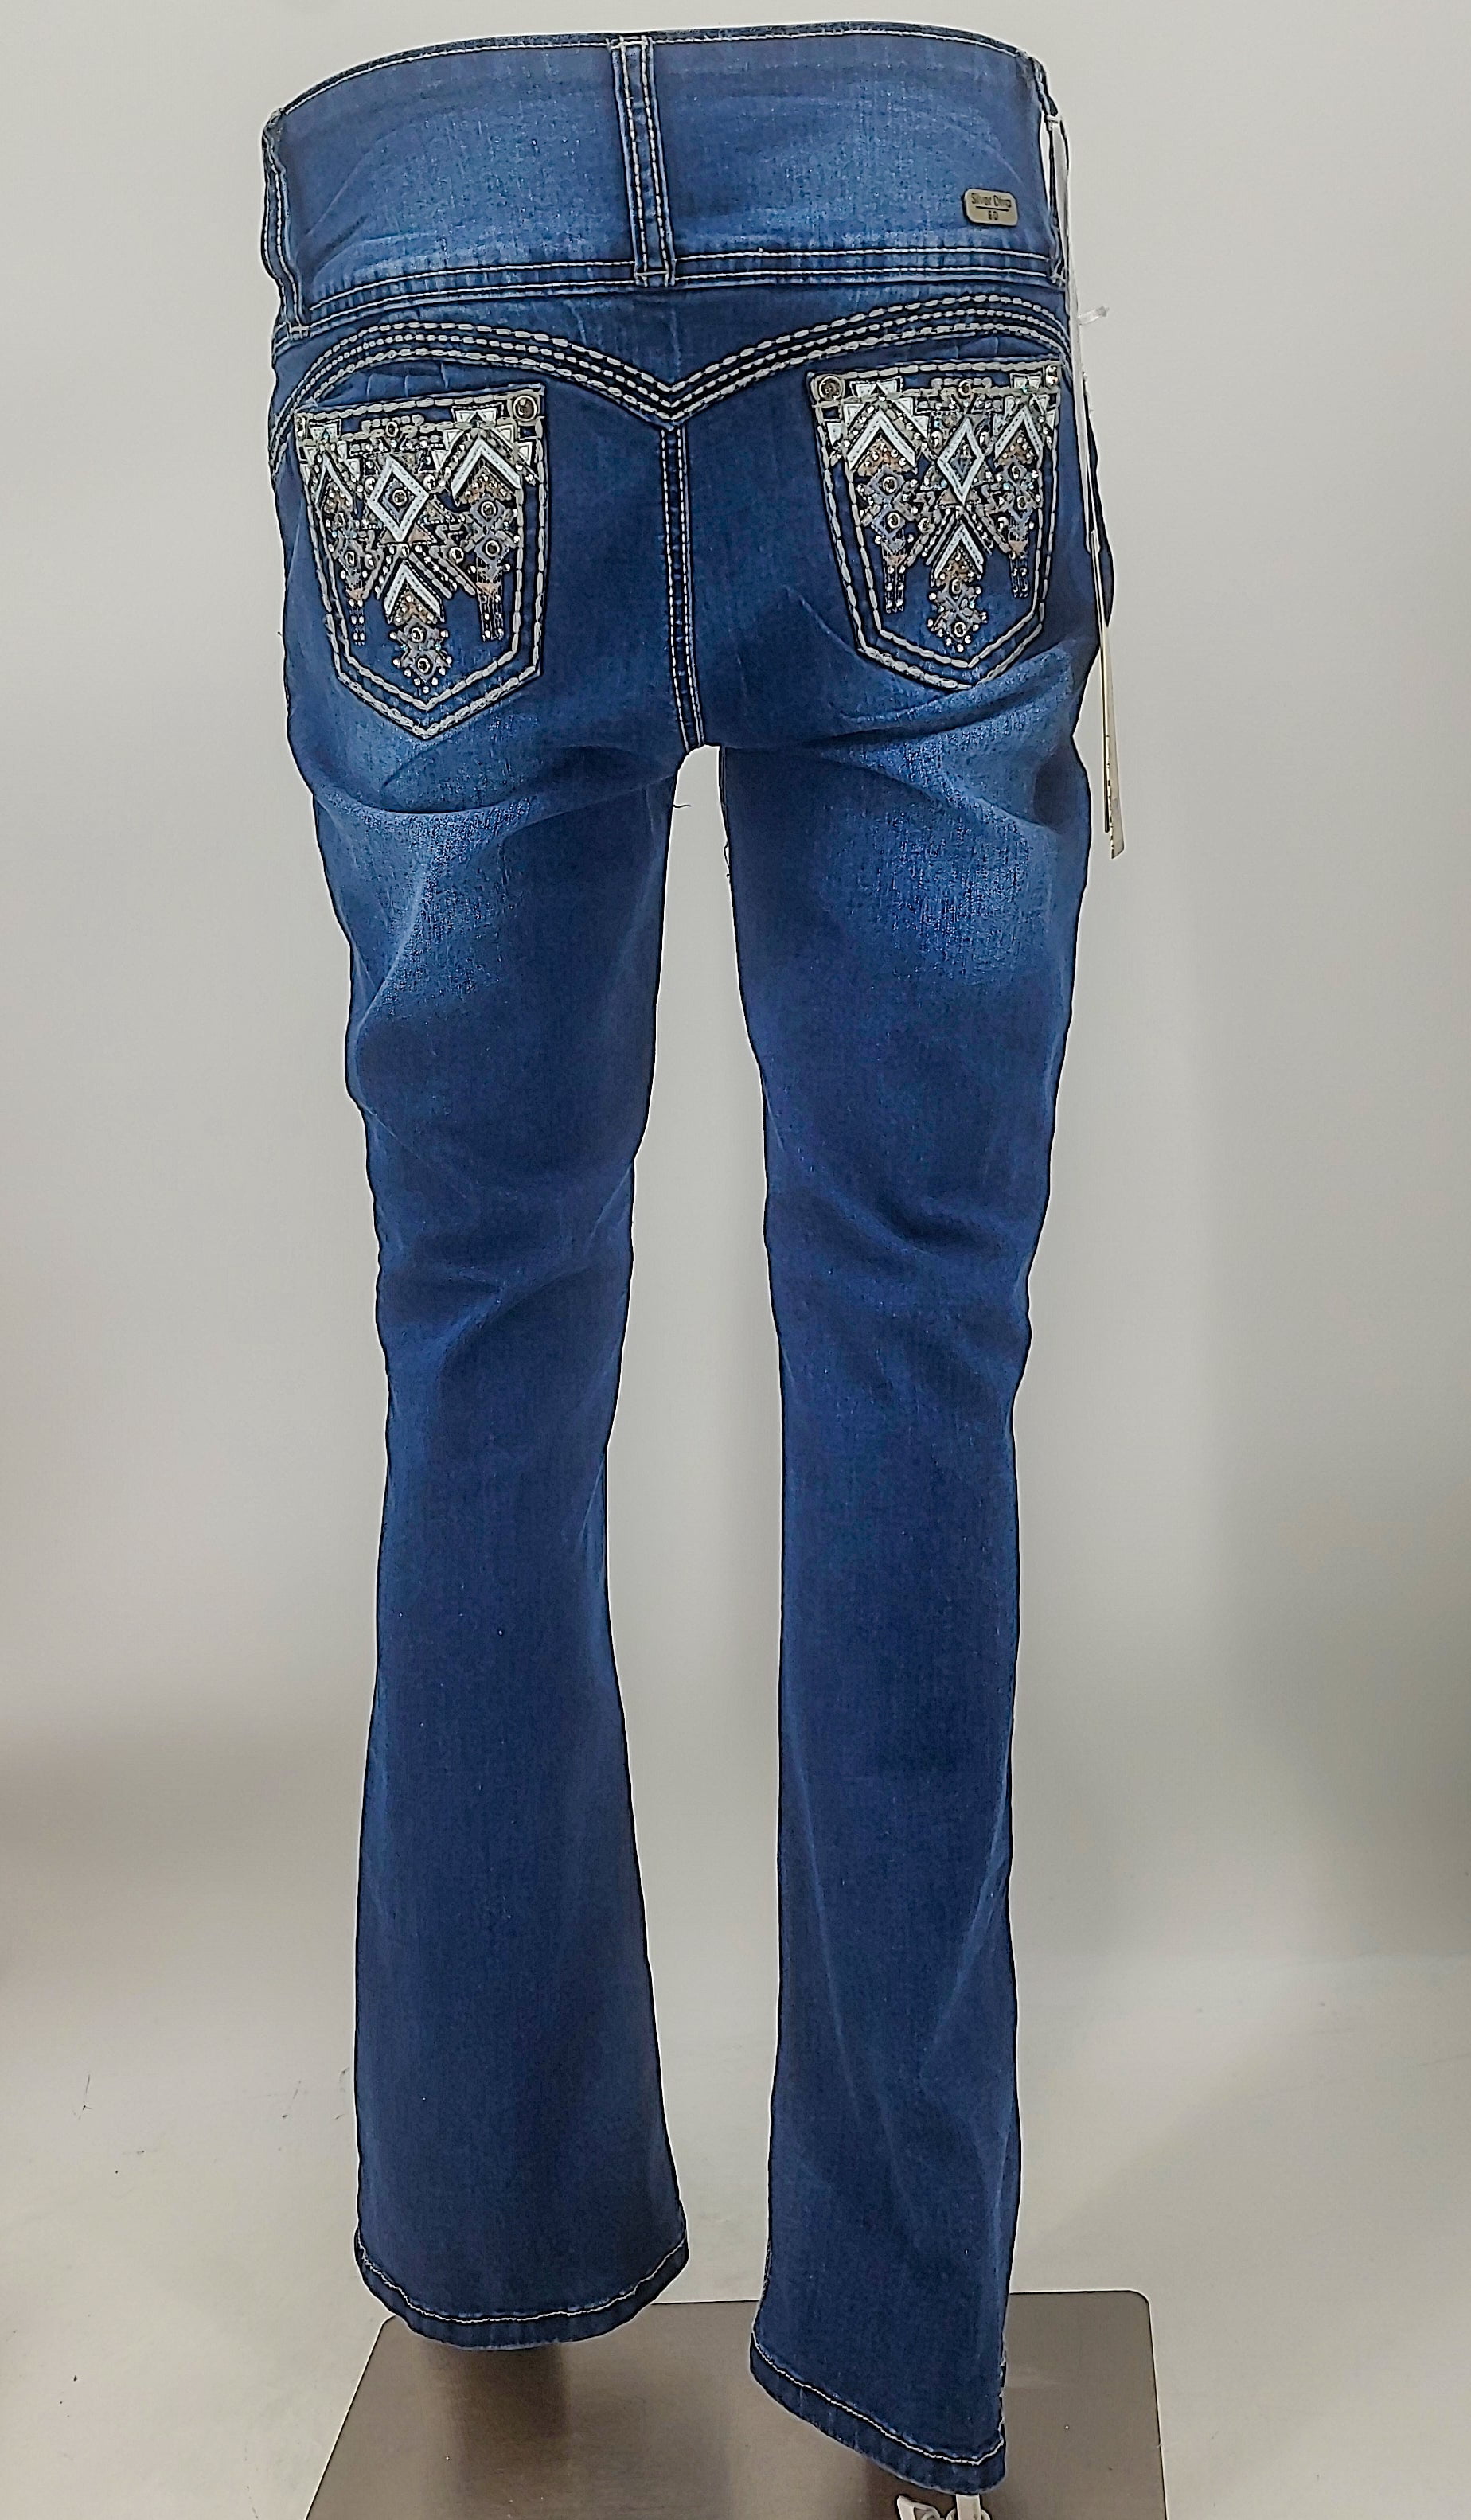 Wholesale silver diva jeans For A Pull-On Classic Look - Alibaba.com